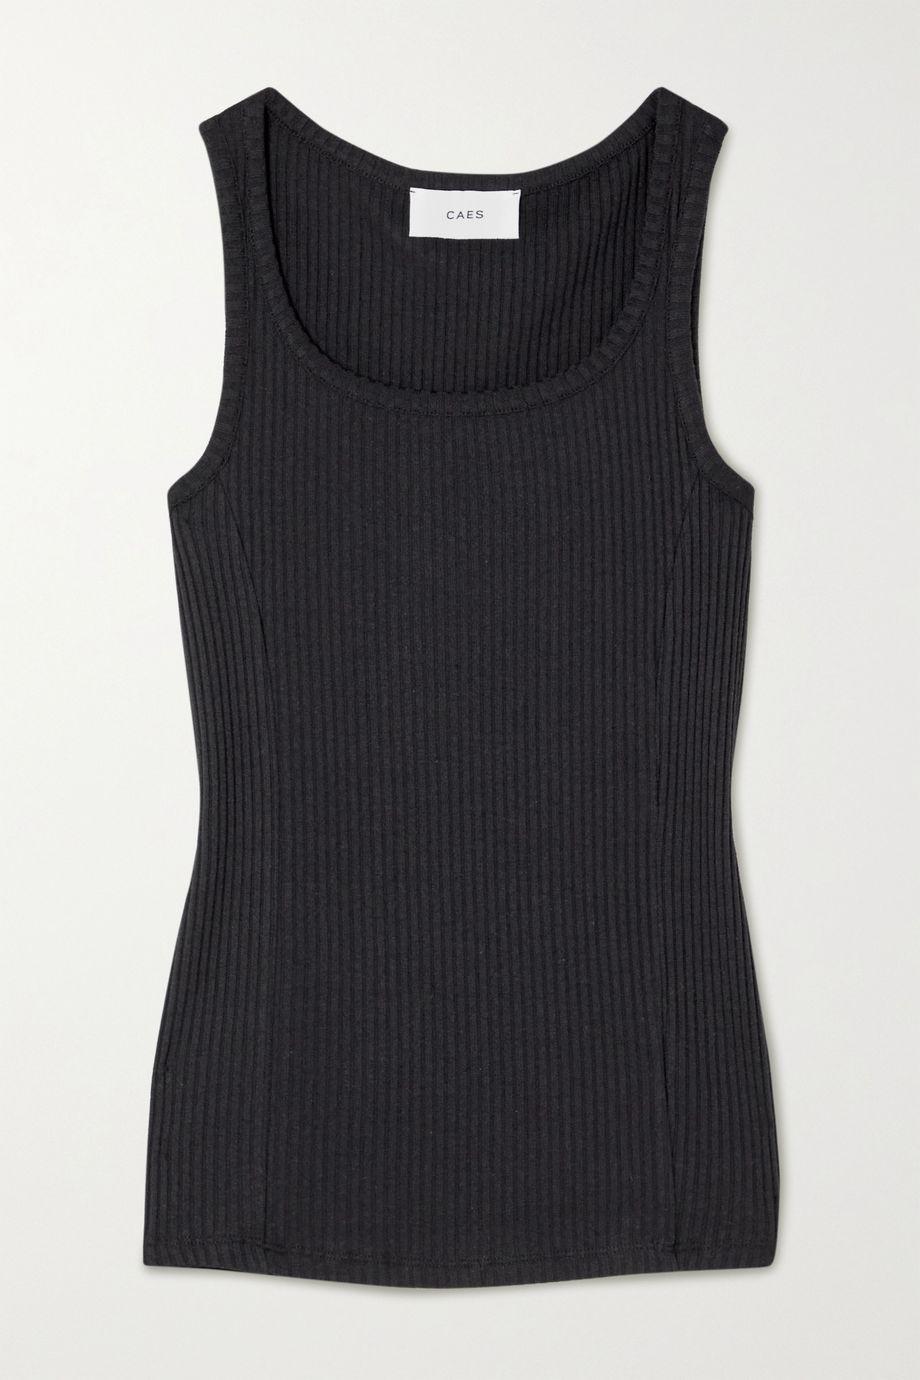 + NET SUSTAIN ribbed stretch-jersey tank by CAES